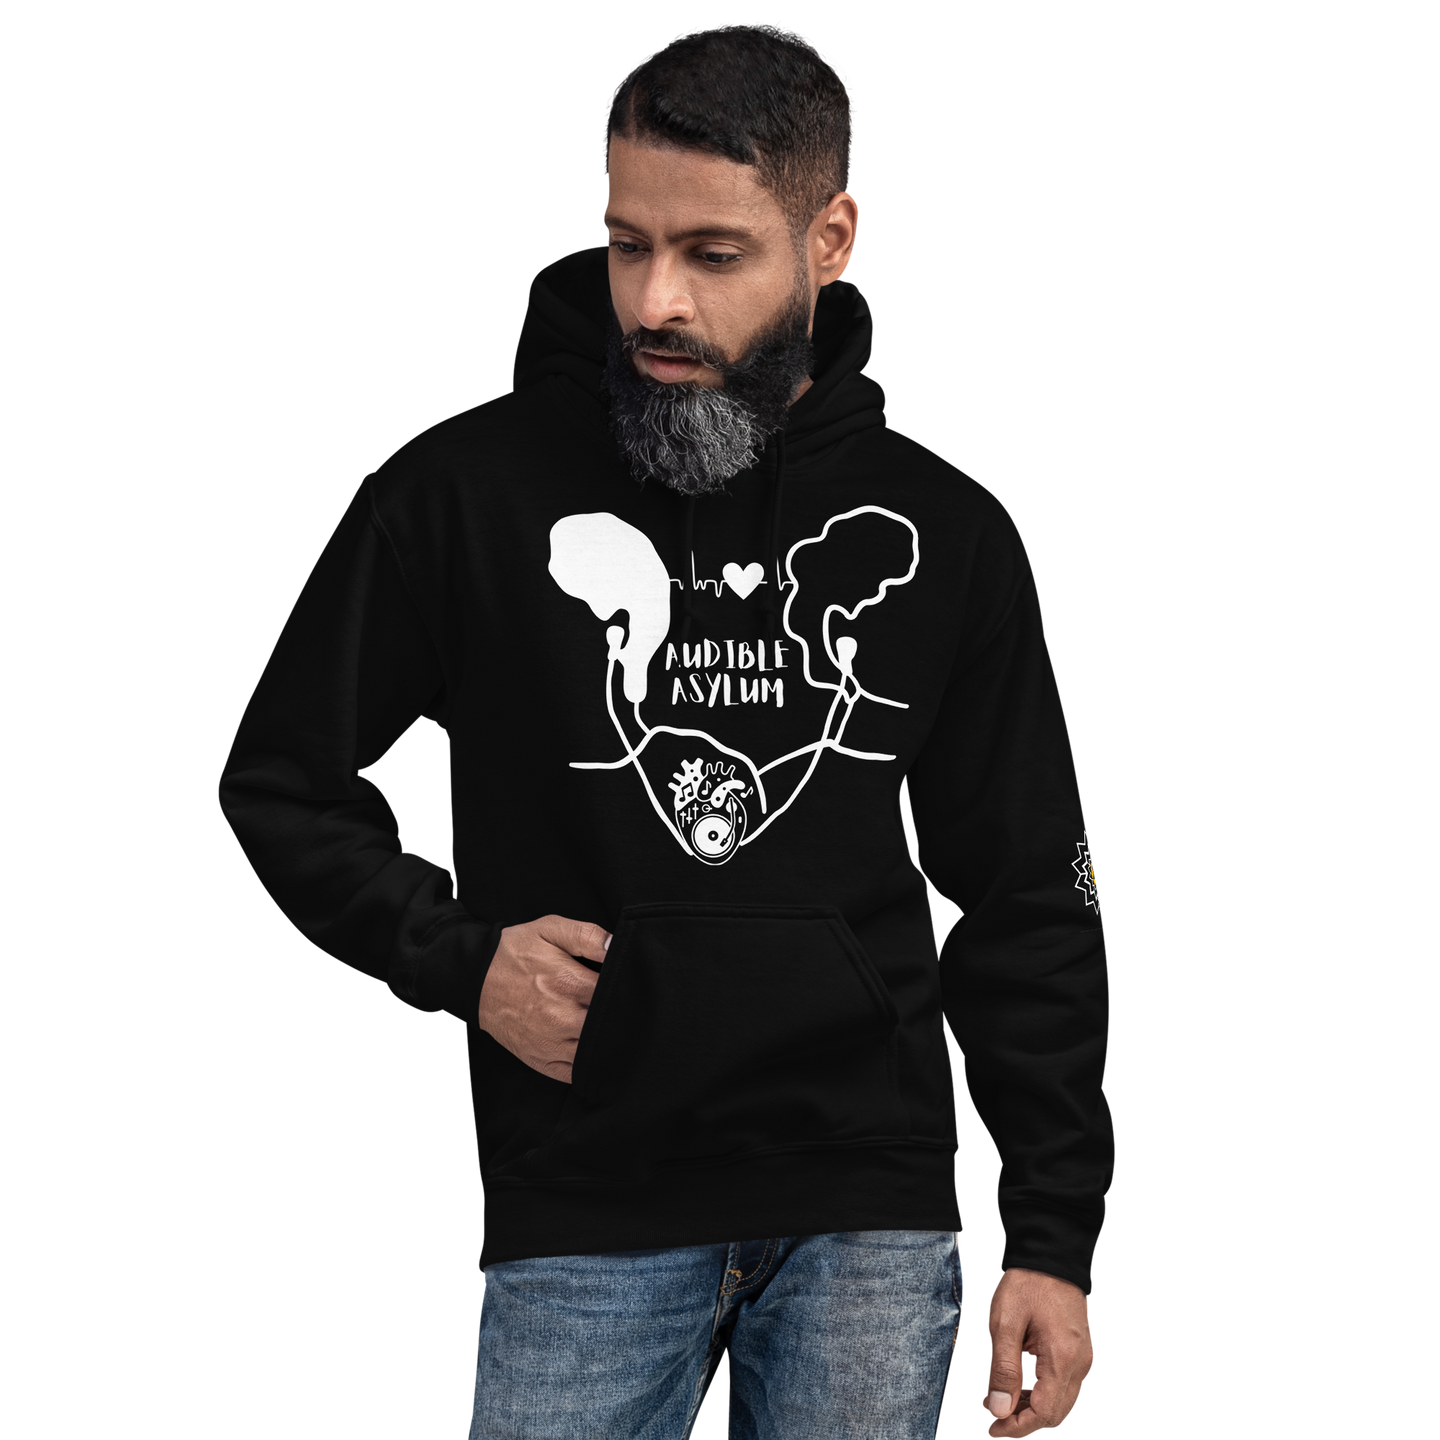 Audible Connection Hoodie